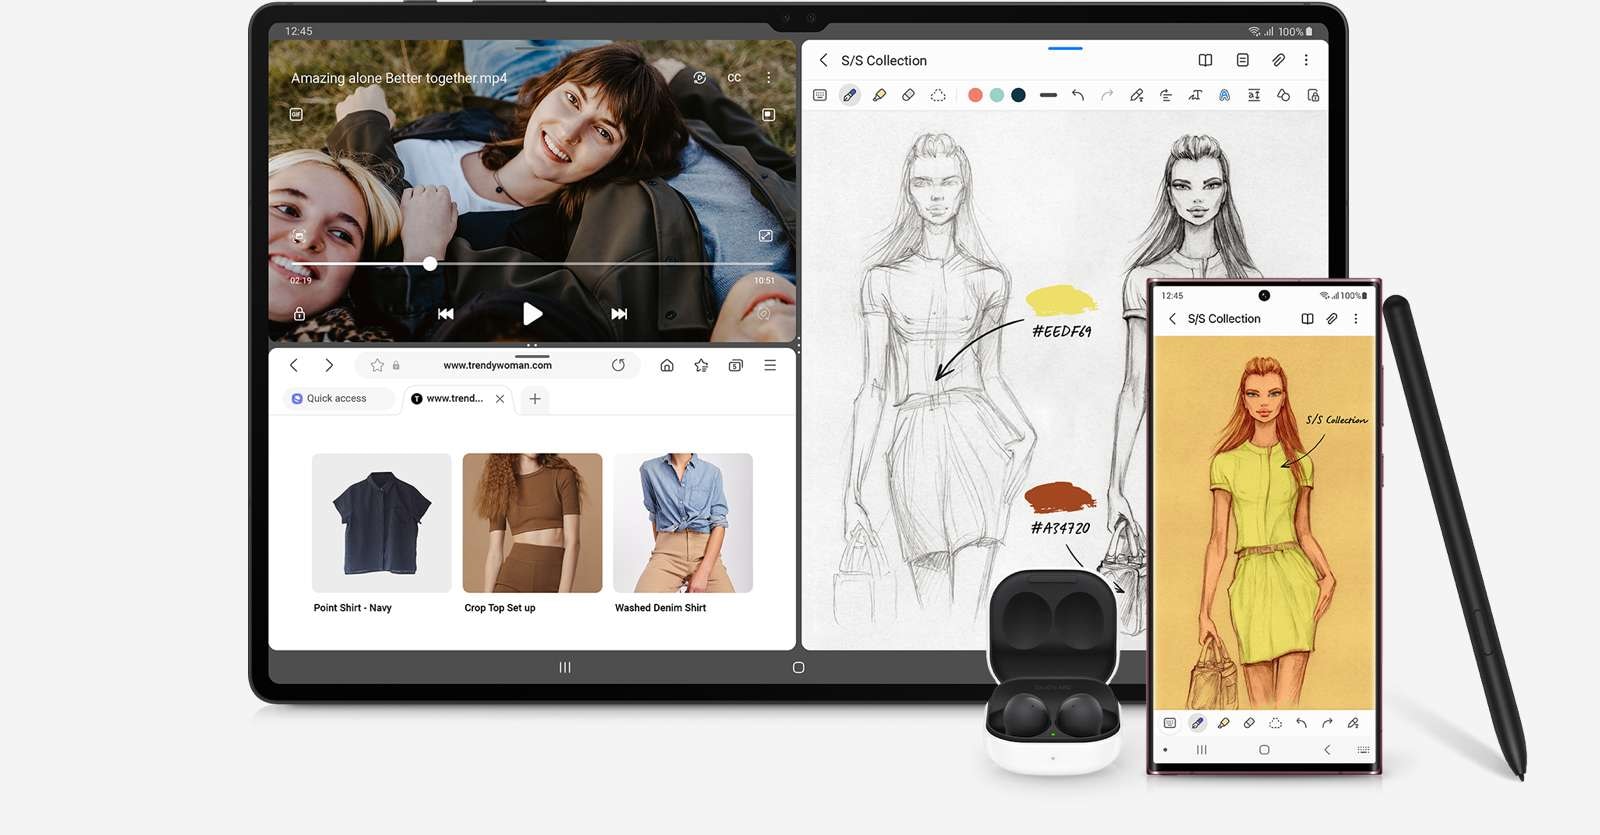 The Galaxy Tab S8 Series screen is divided into three windows. A video call with a woman resting on someone's knees is shown on the top left. Below, there is a shopping site open. Beside, there are design sketches. Galaxy Buds2, Galaxy S22 Ultra with the same sketch window opened, and S Pen are on the bottom right corner of Galaxy Tab S8 Series.